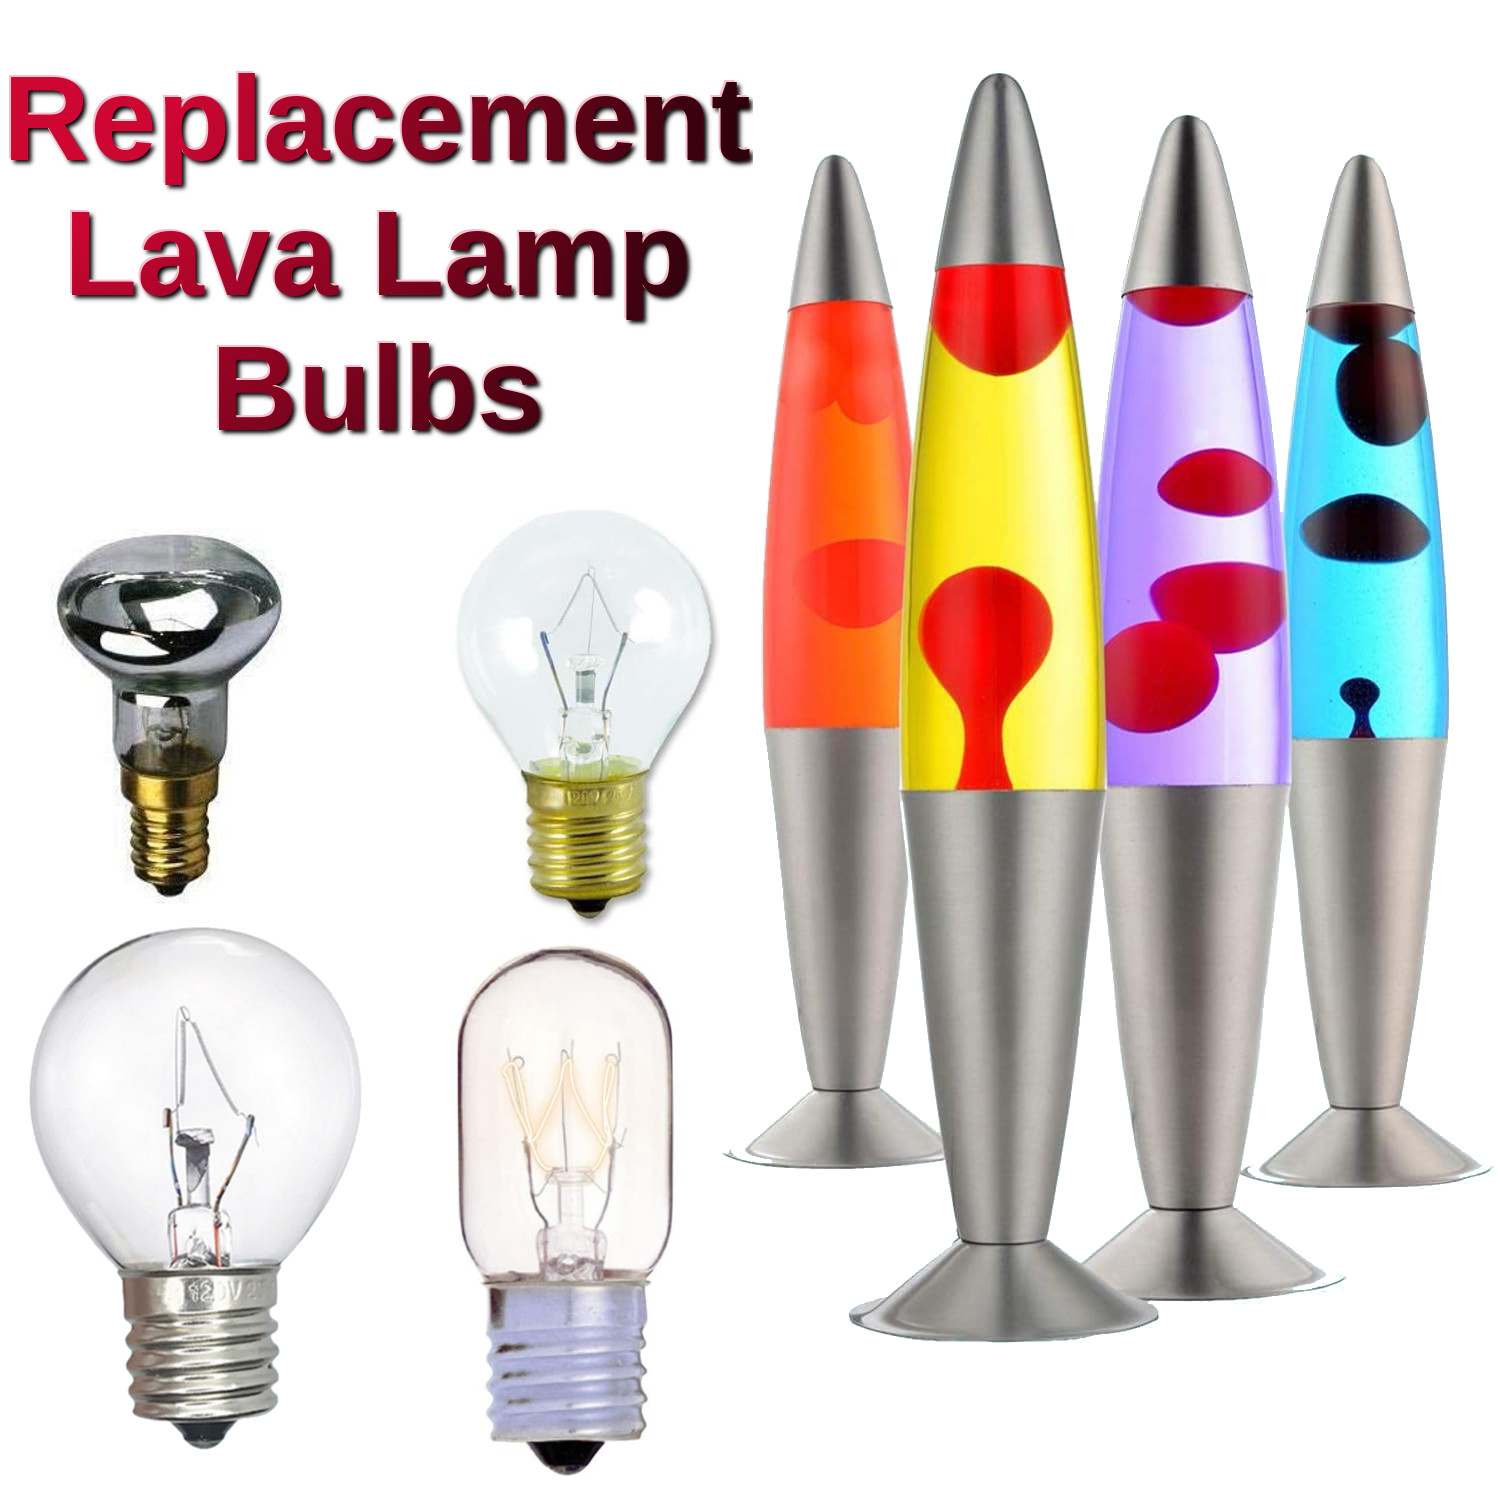 Replacement Lava Lamp Bulbs